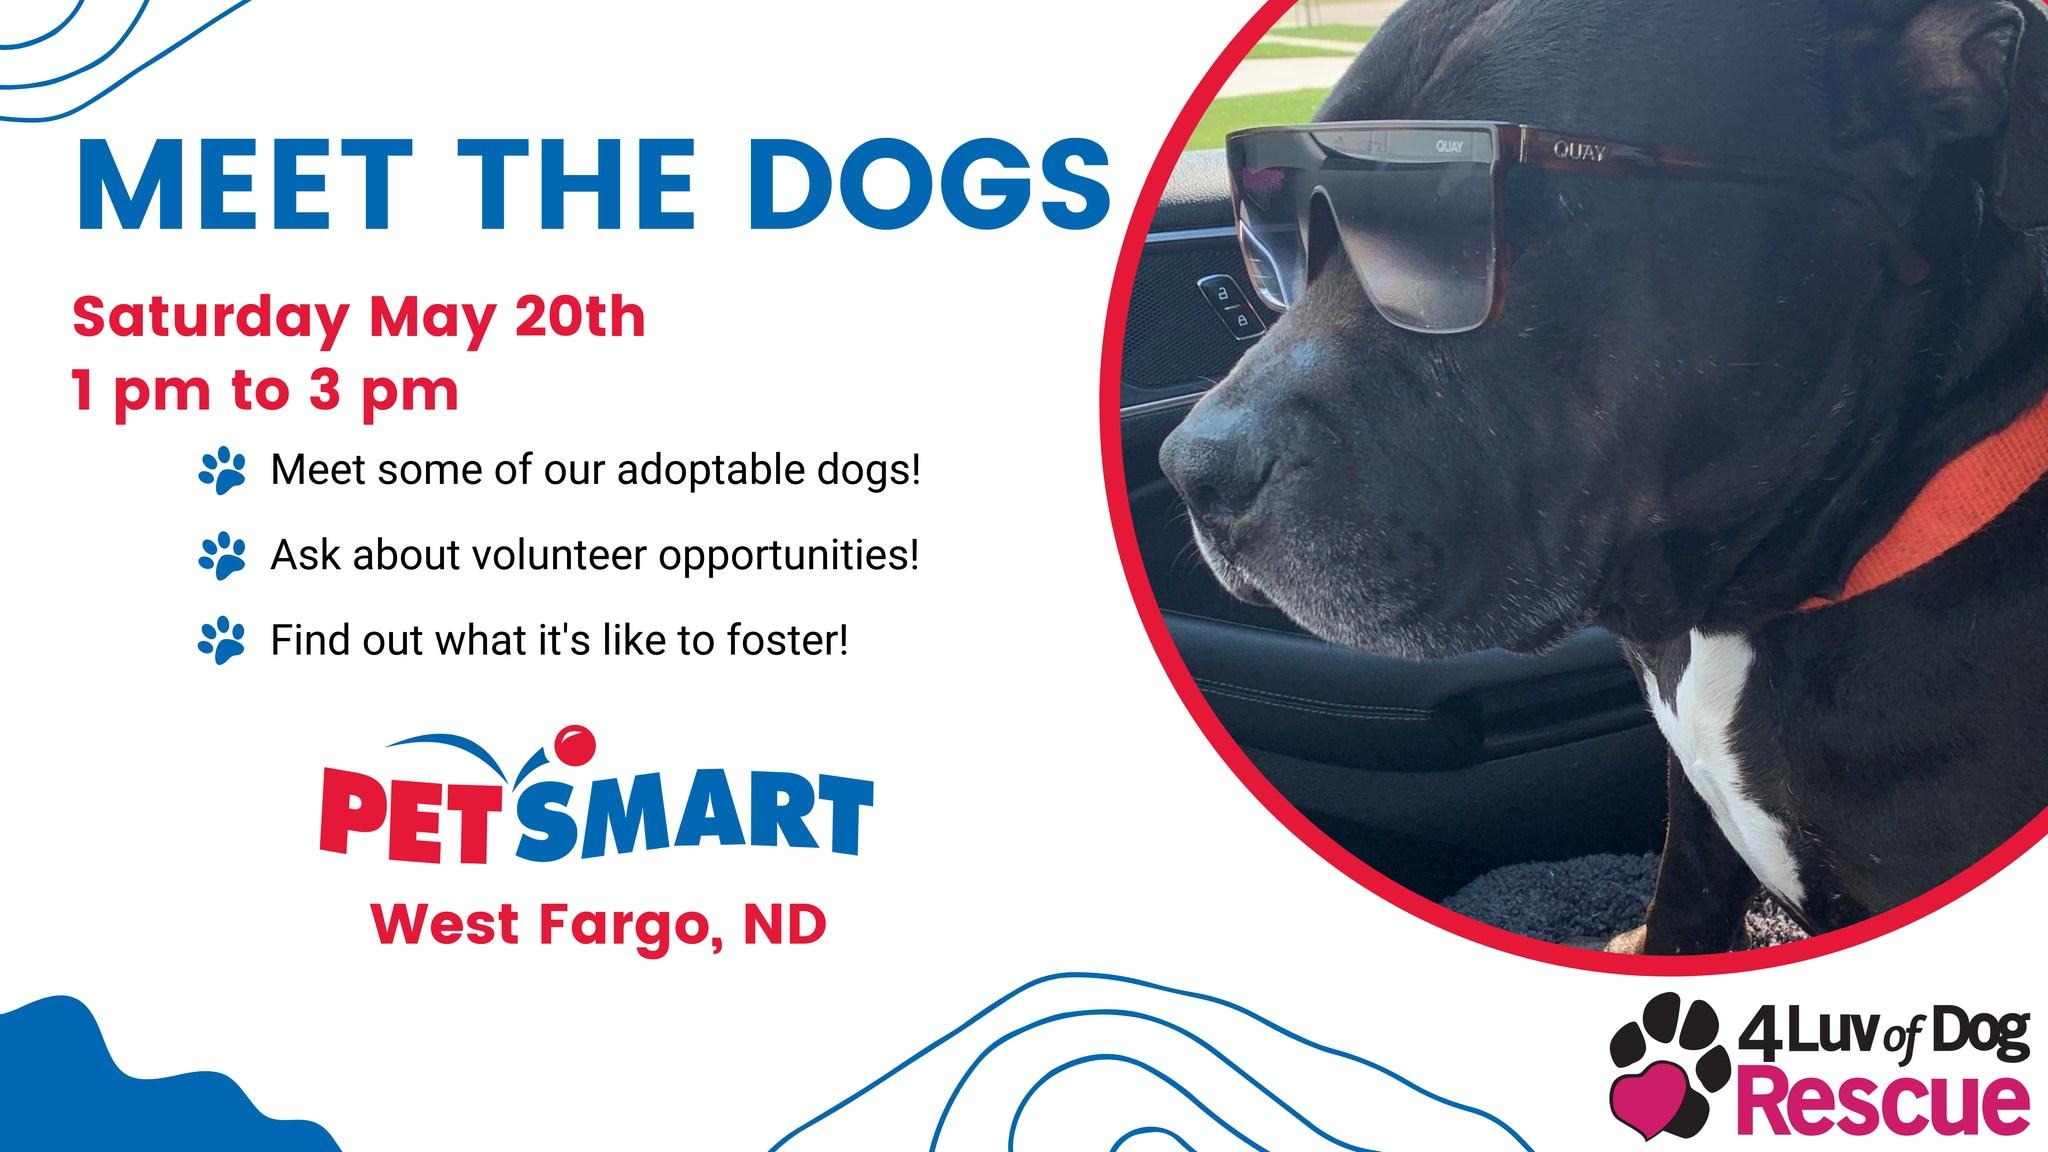 Meet the Dogs - West Fargo, ND PetSmart Event - May 20, 2023